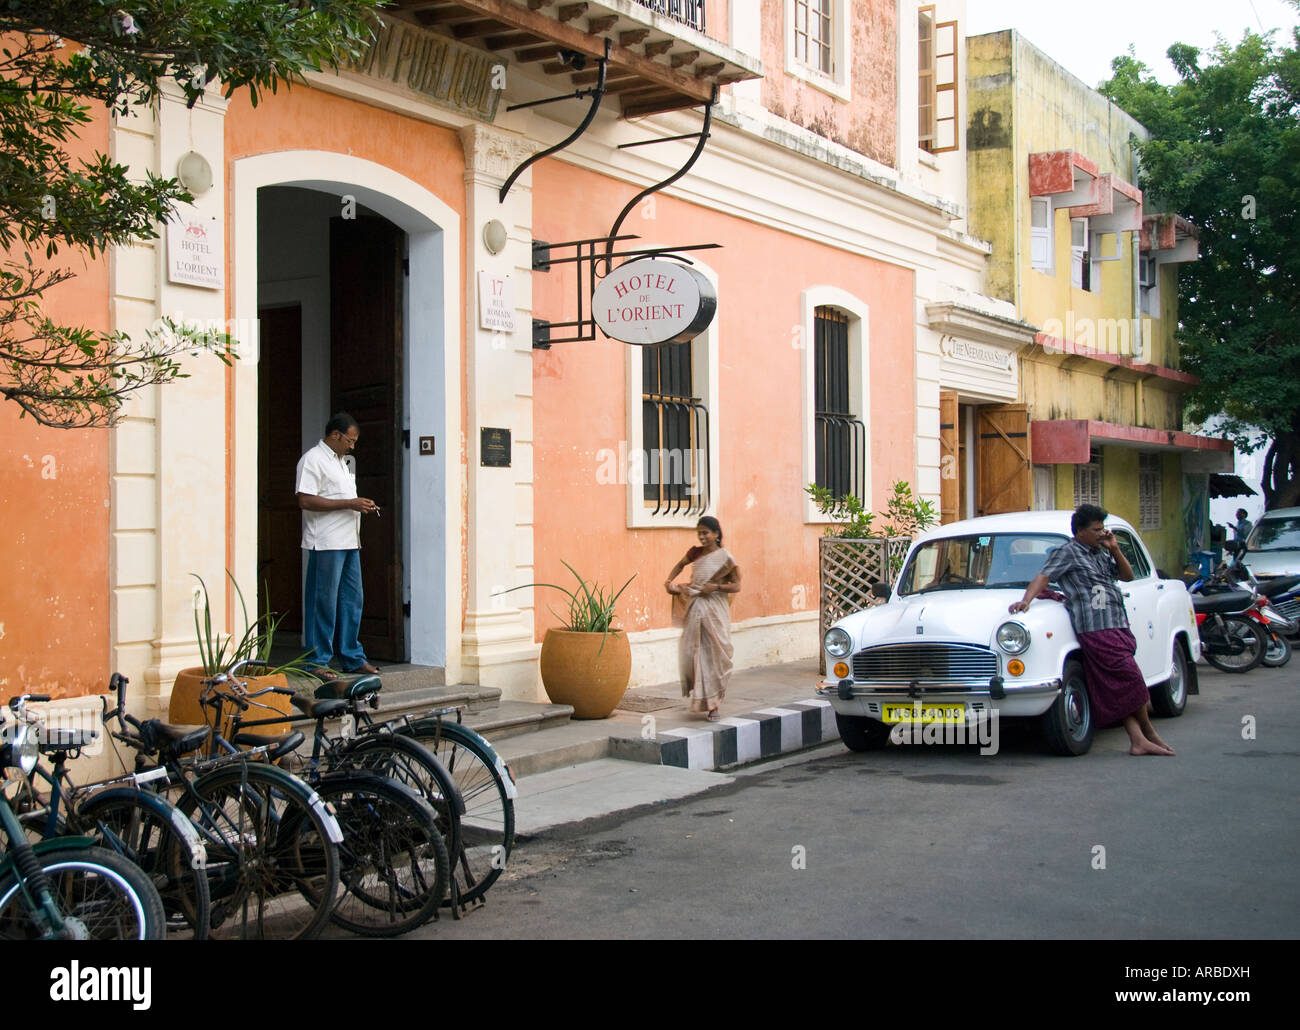 A hotel in a street in Pondicherry India Stock Photo